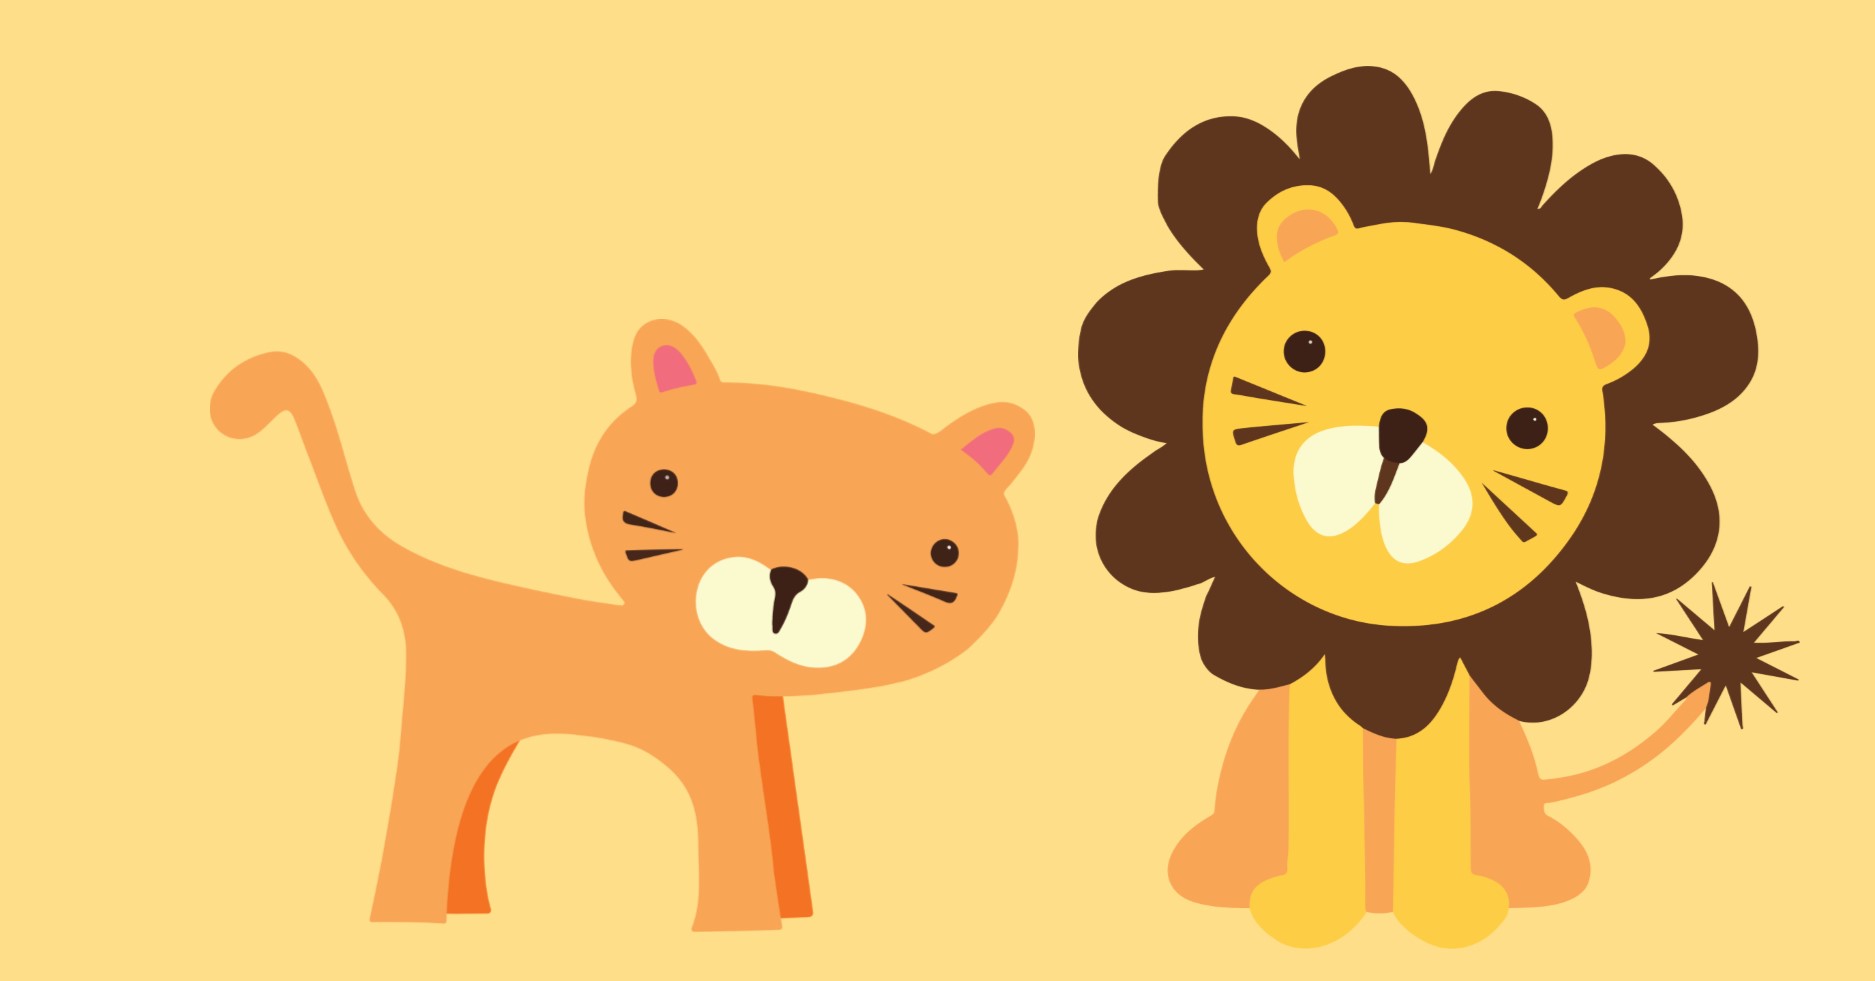 Toy tiger and lion on yellow background